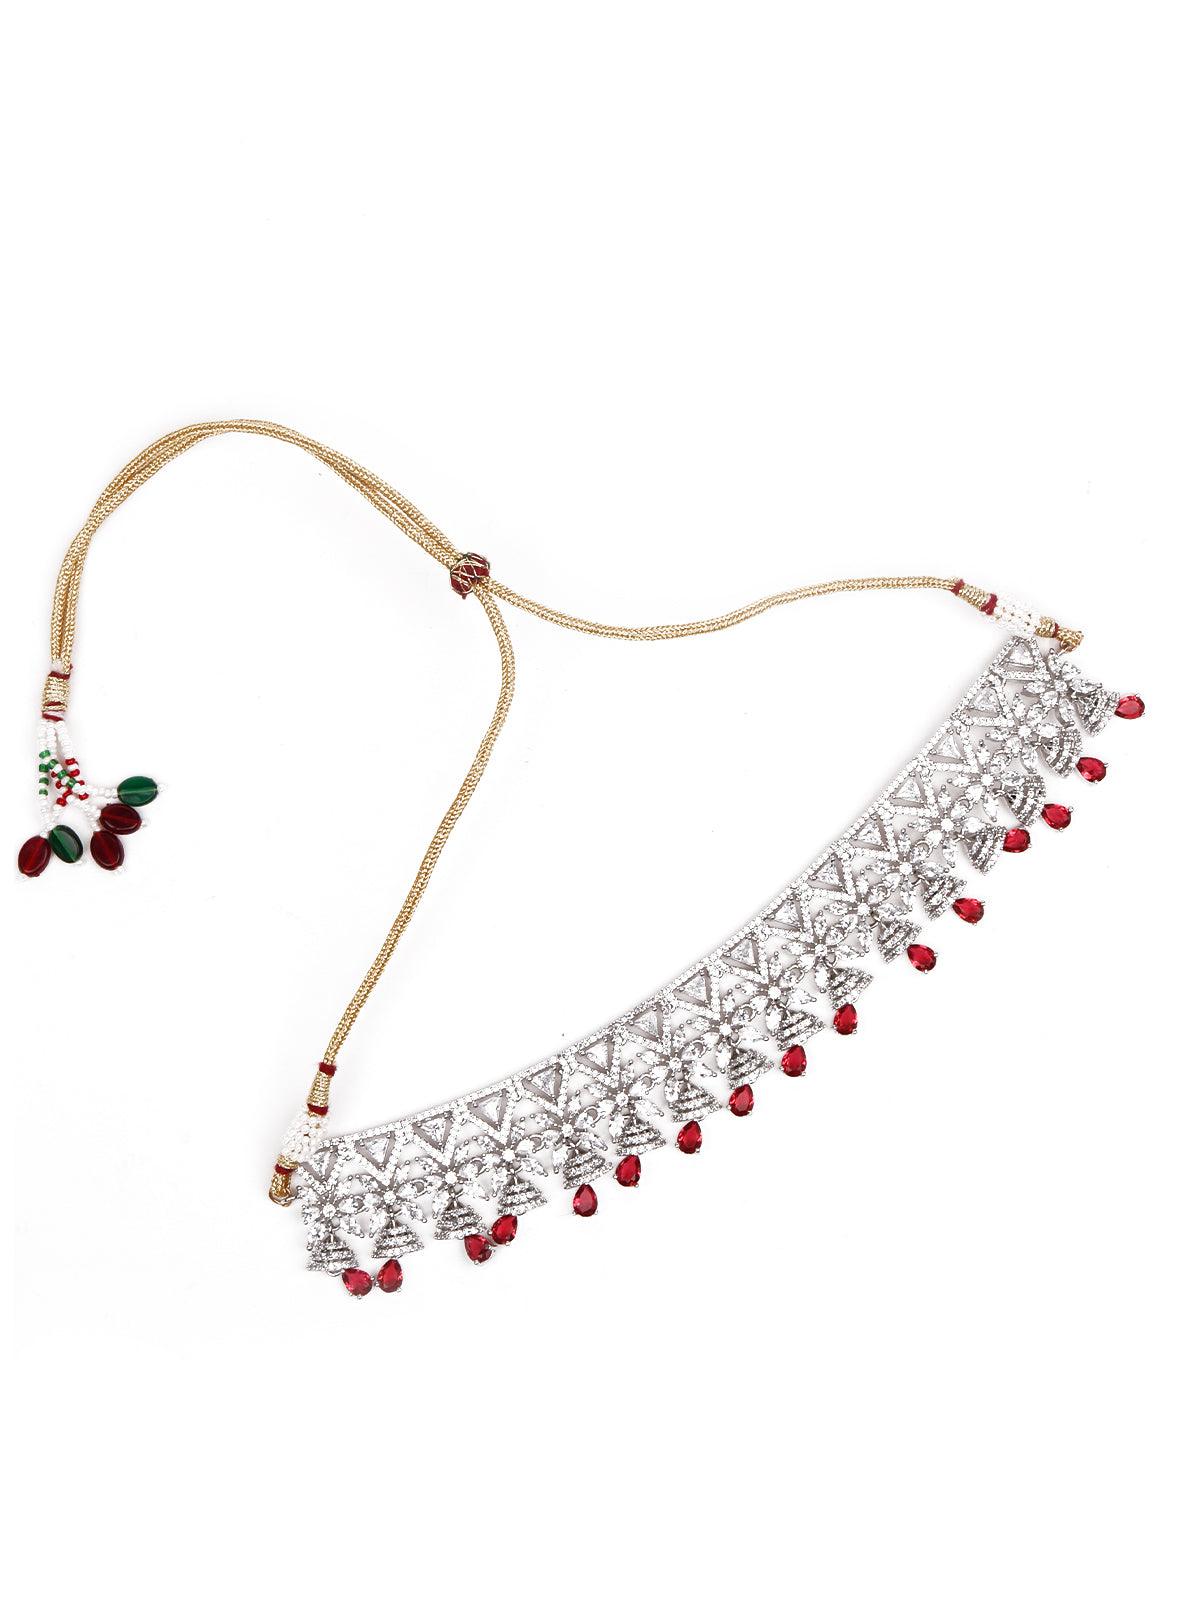 Silver-Tone Jewellery Set Embellished With Rubies - Odette